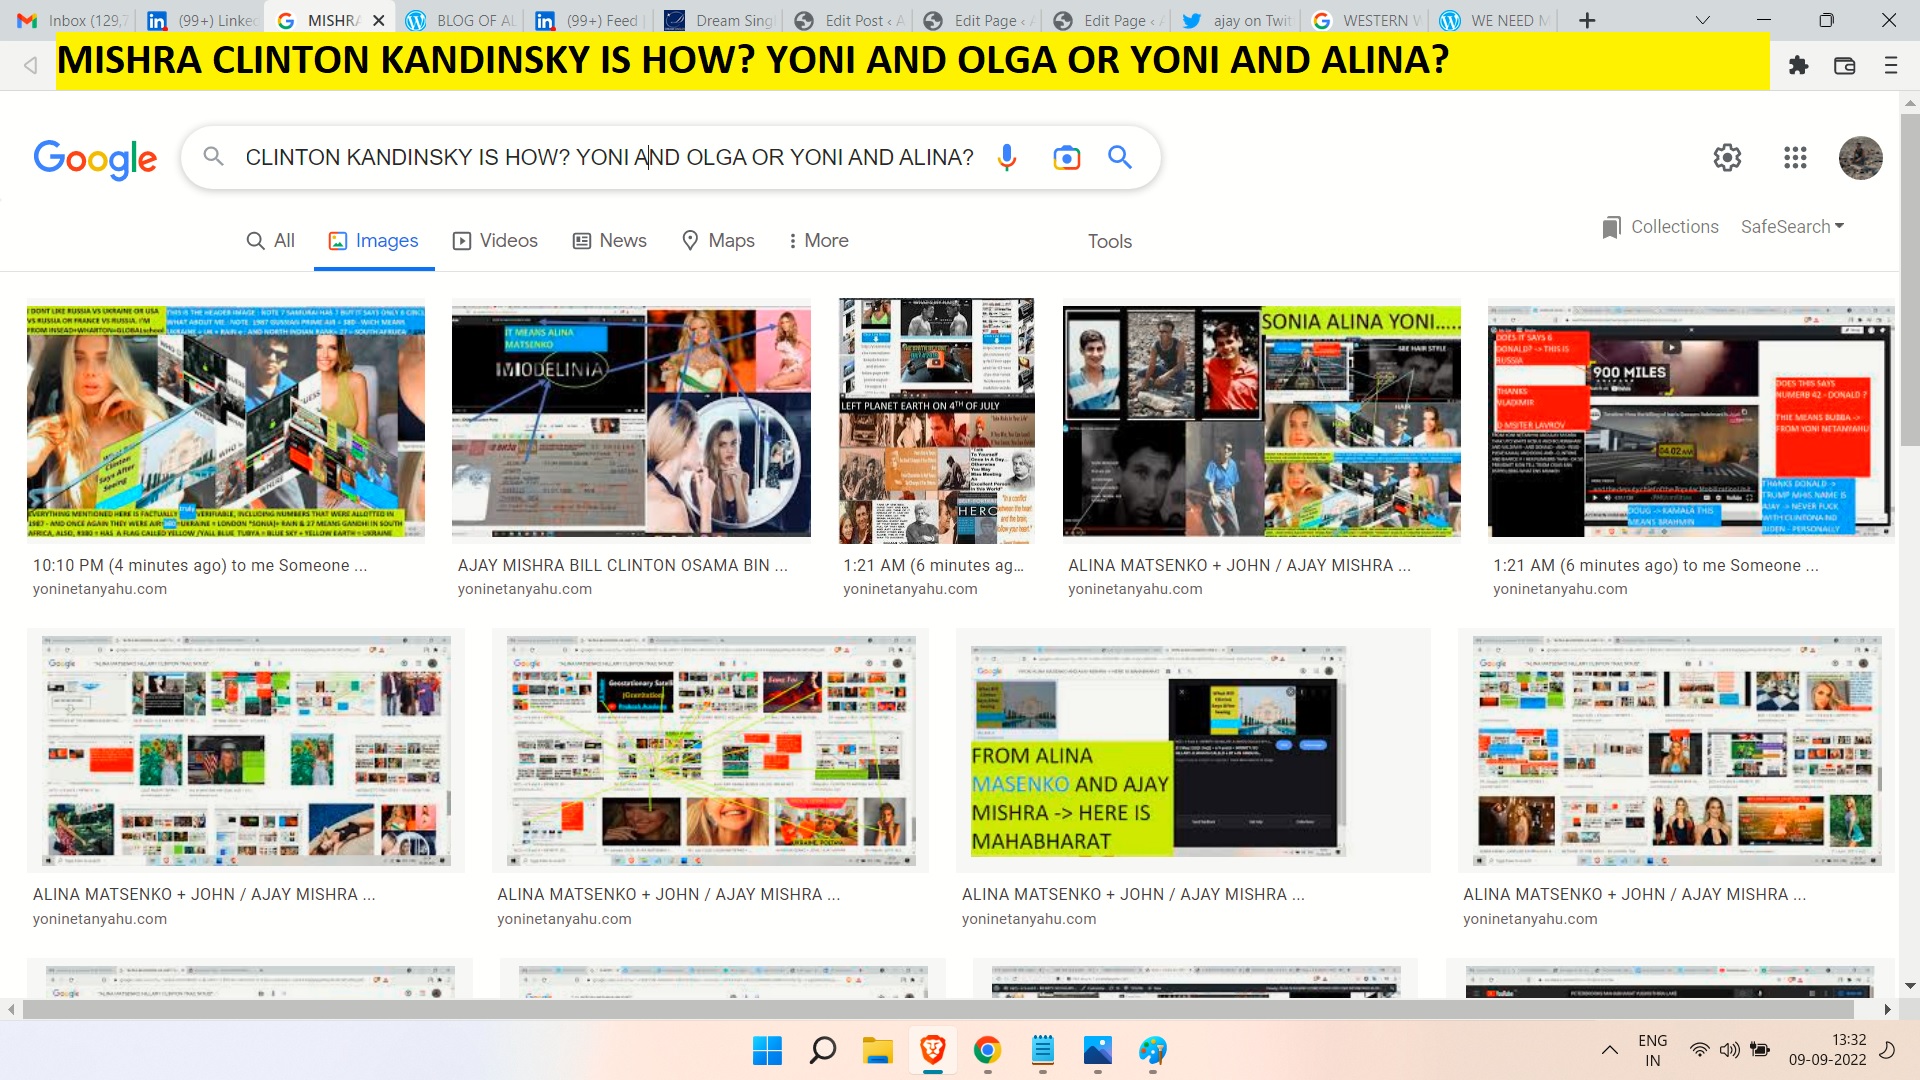 MISHRA CLINTON KANDISNKY IS HOW - ANSWER IS YONI NETANYAHU AND ALAINA AND NOW SU,NDAR PICHAI AND GOOGLE THIS IS LAST TIME DONT CHNAGE YOUR IMAGES BECASSED ON WHAT THEY DECIDE WHAT I SAID